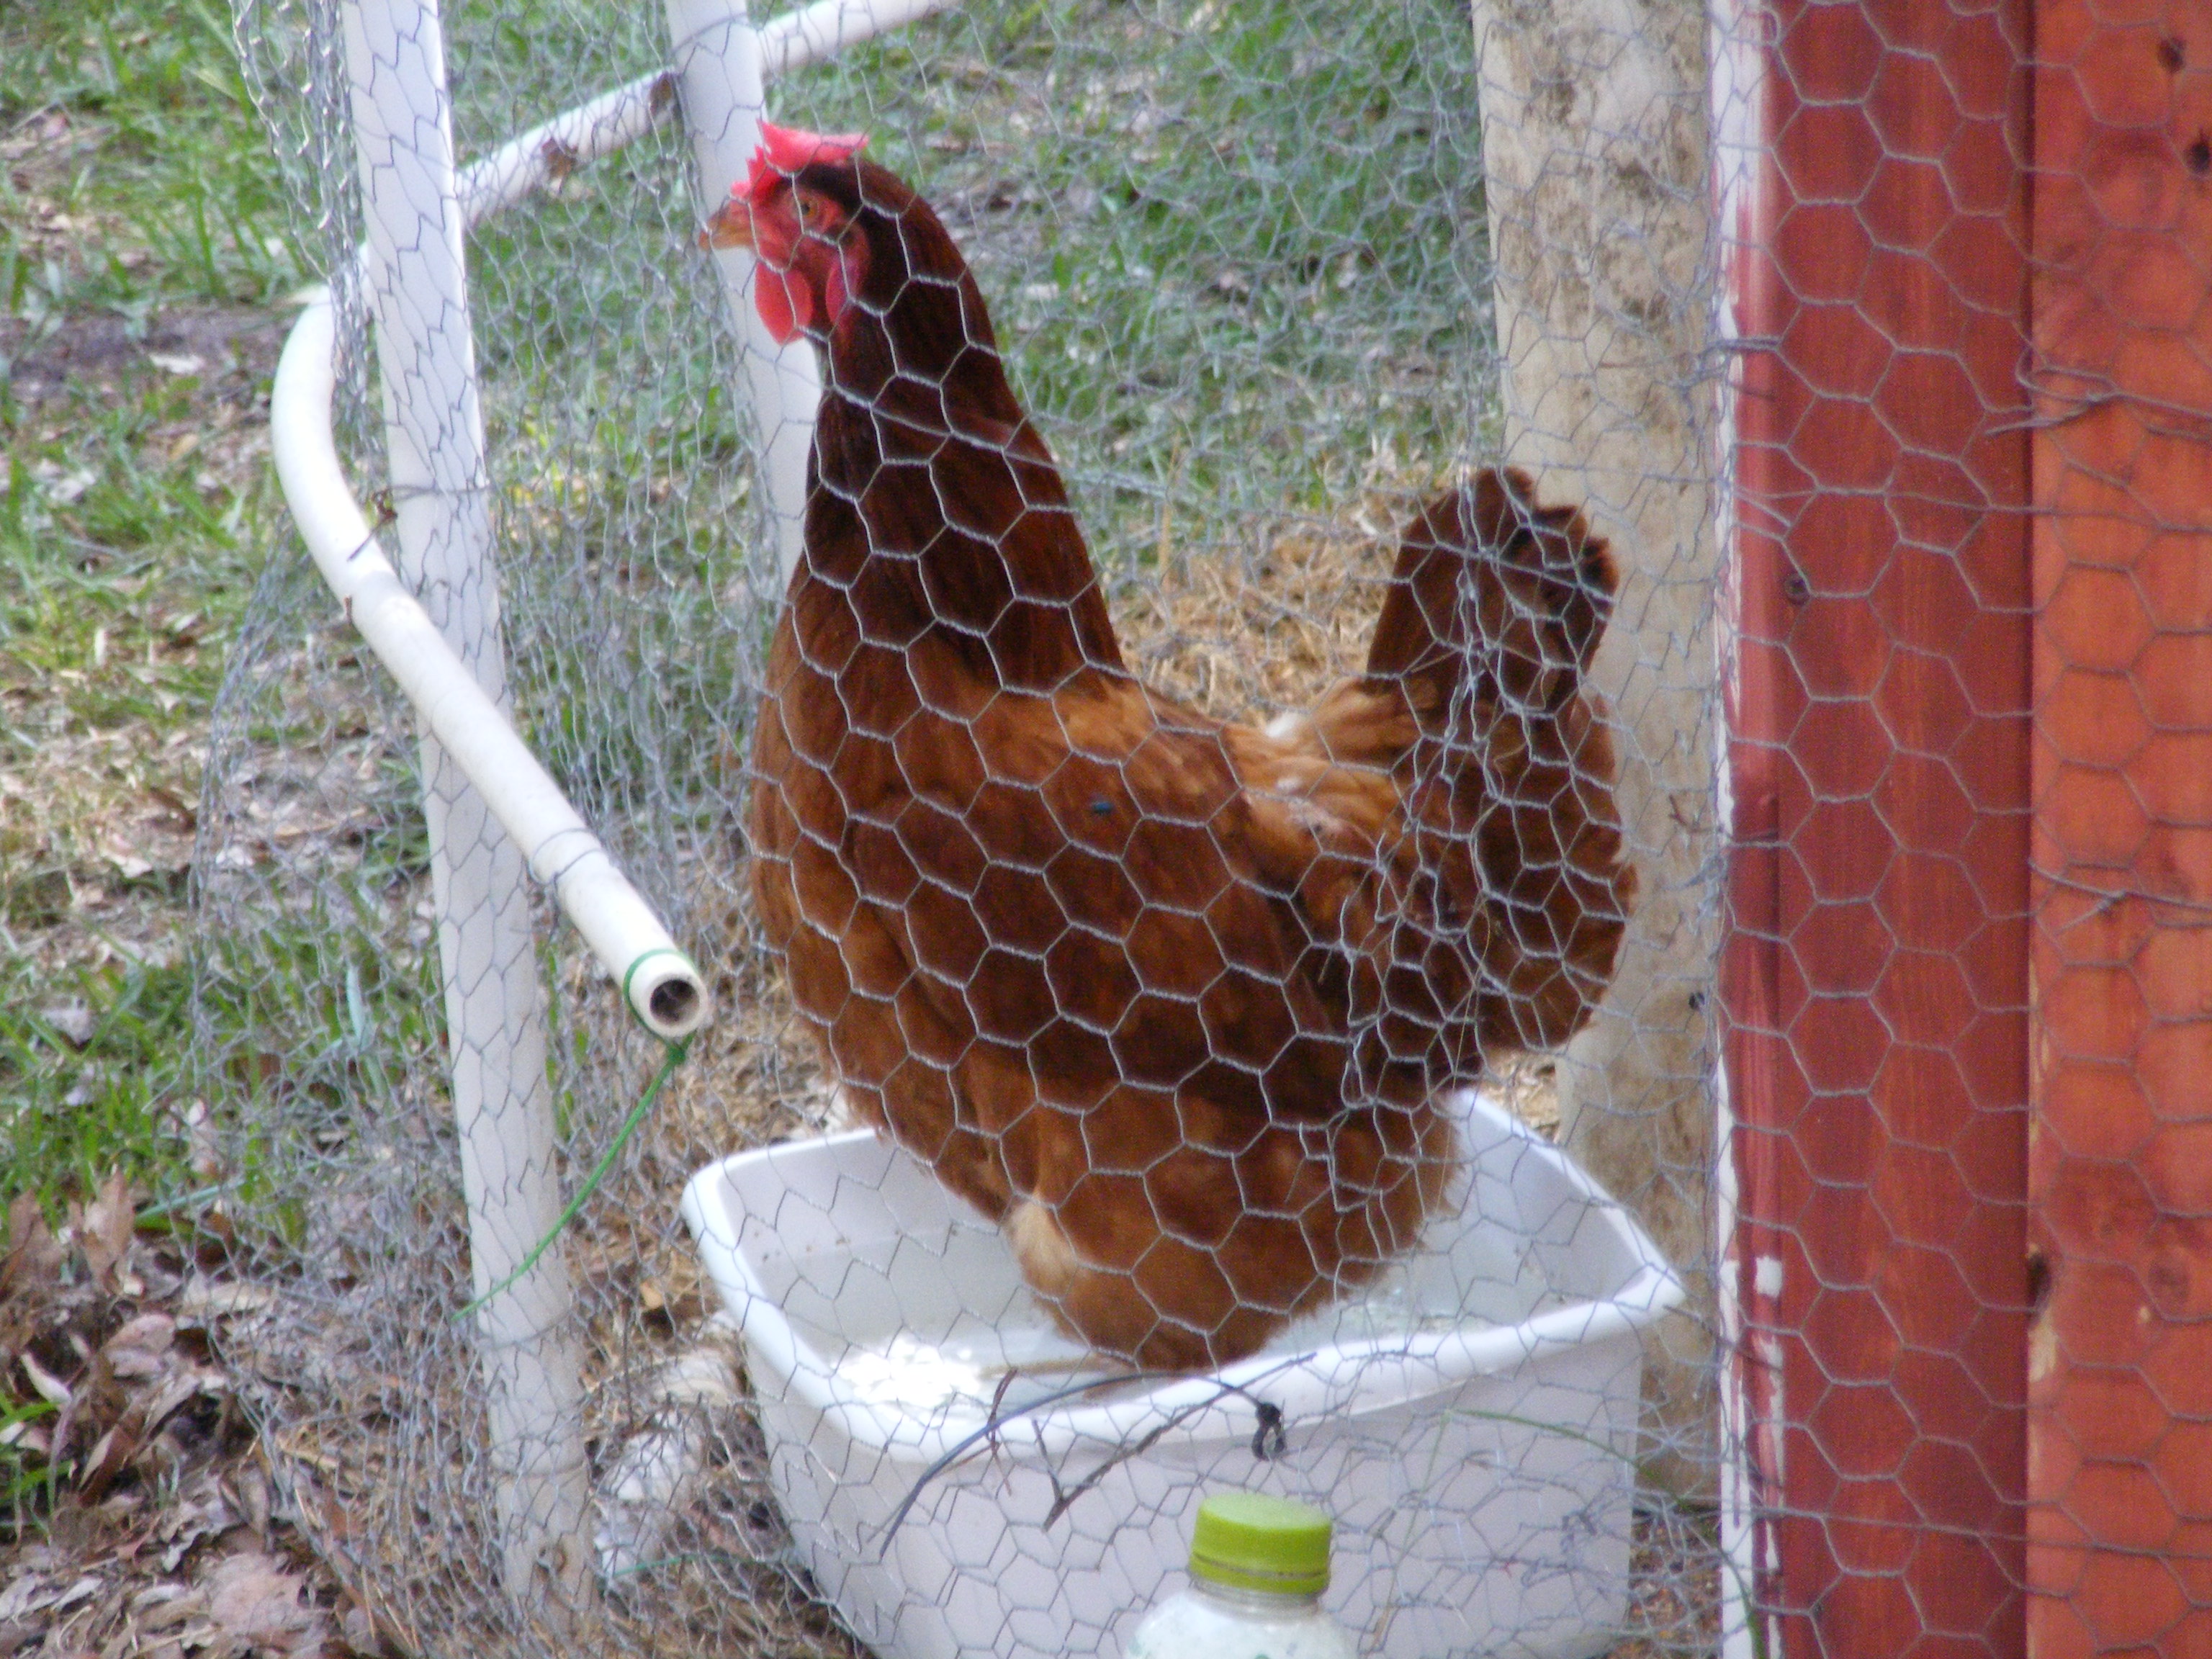 One of our reds using her water tub to cool off in the NE Florida heat